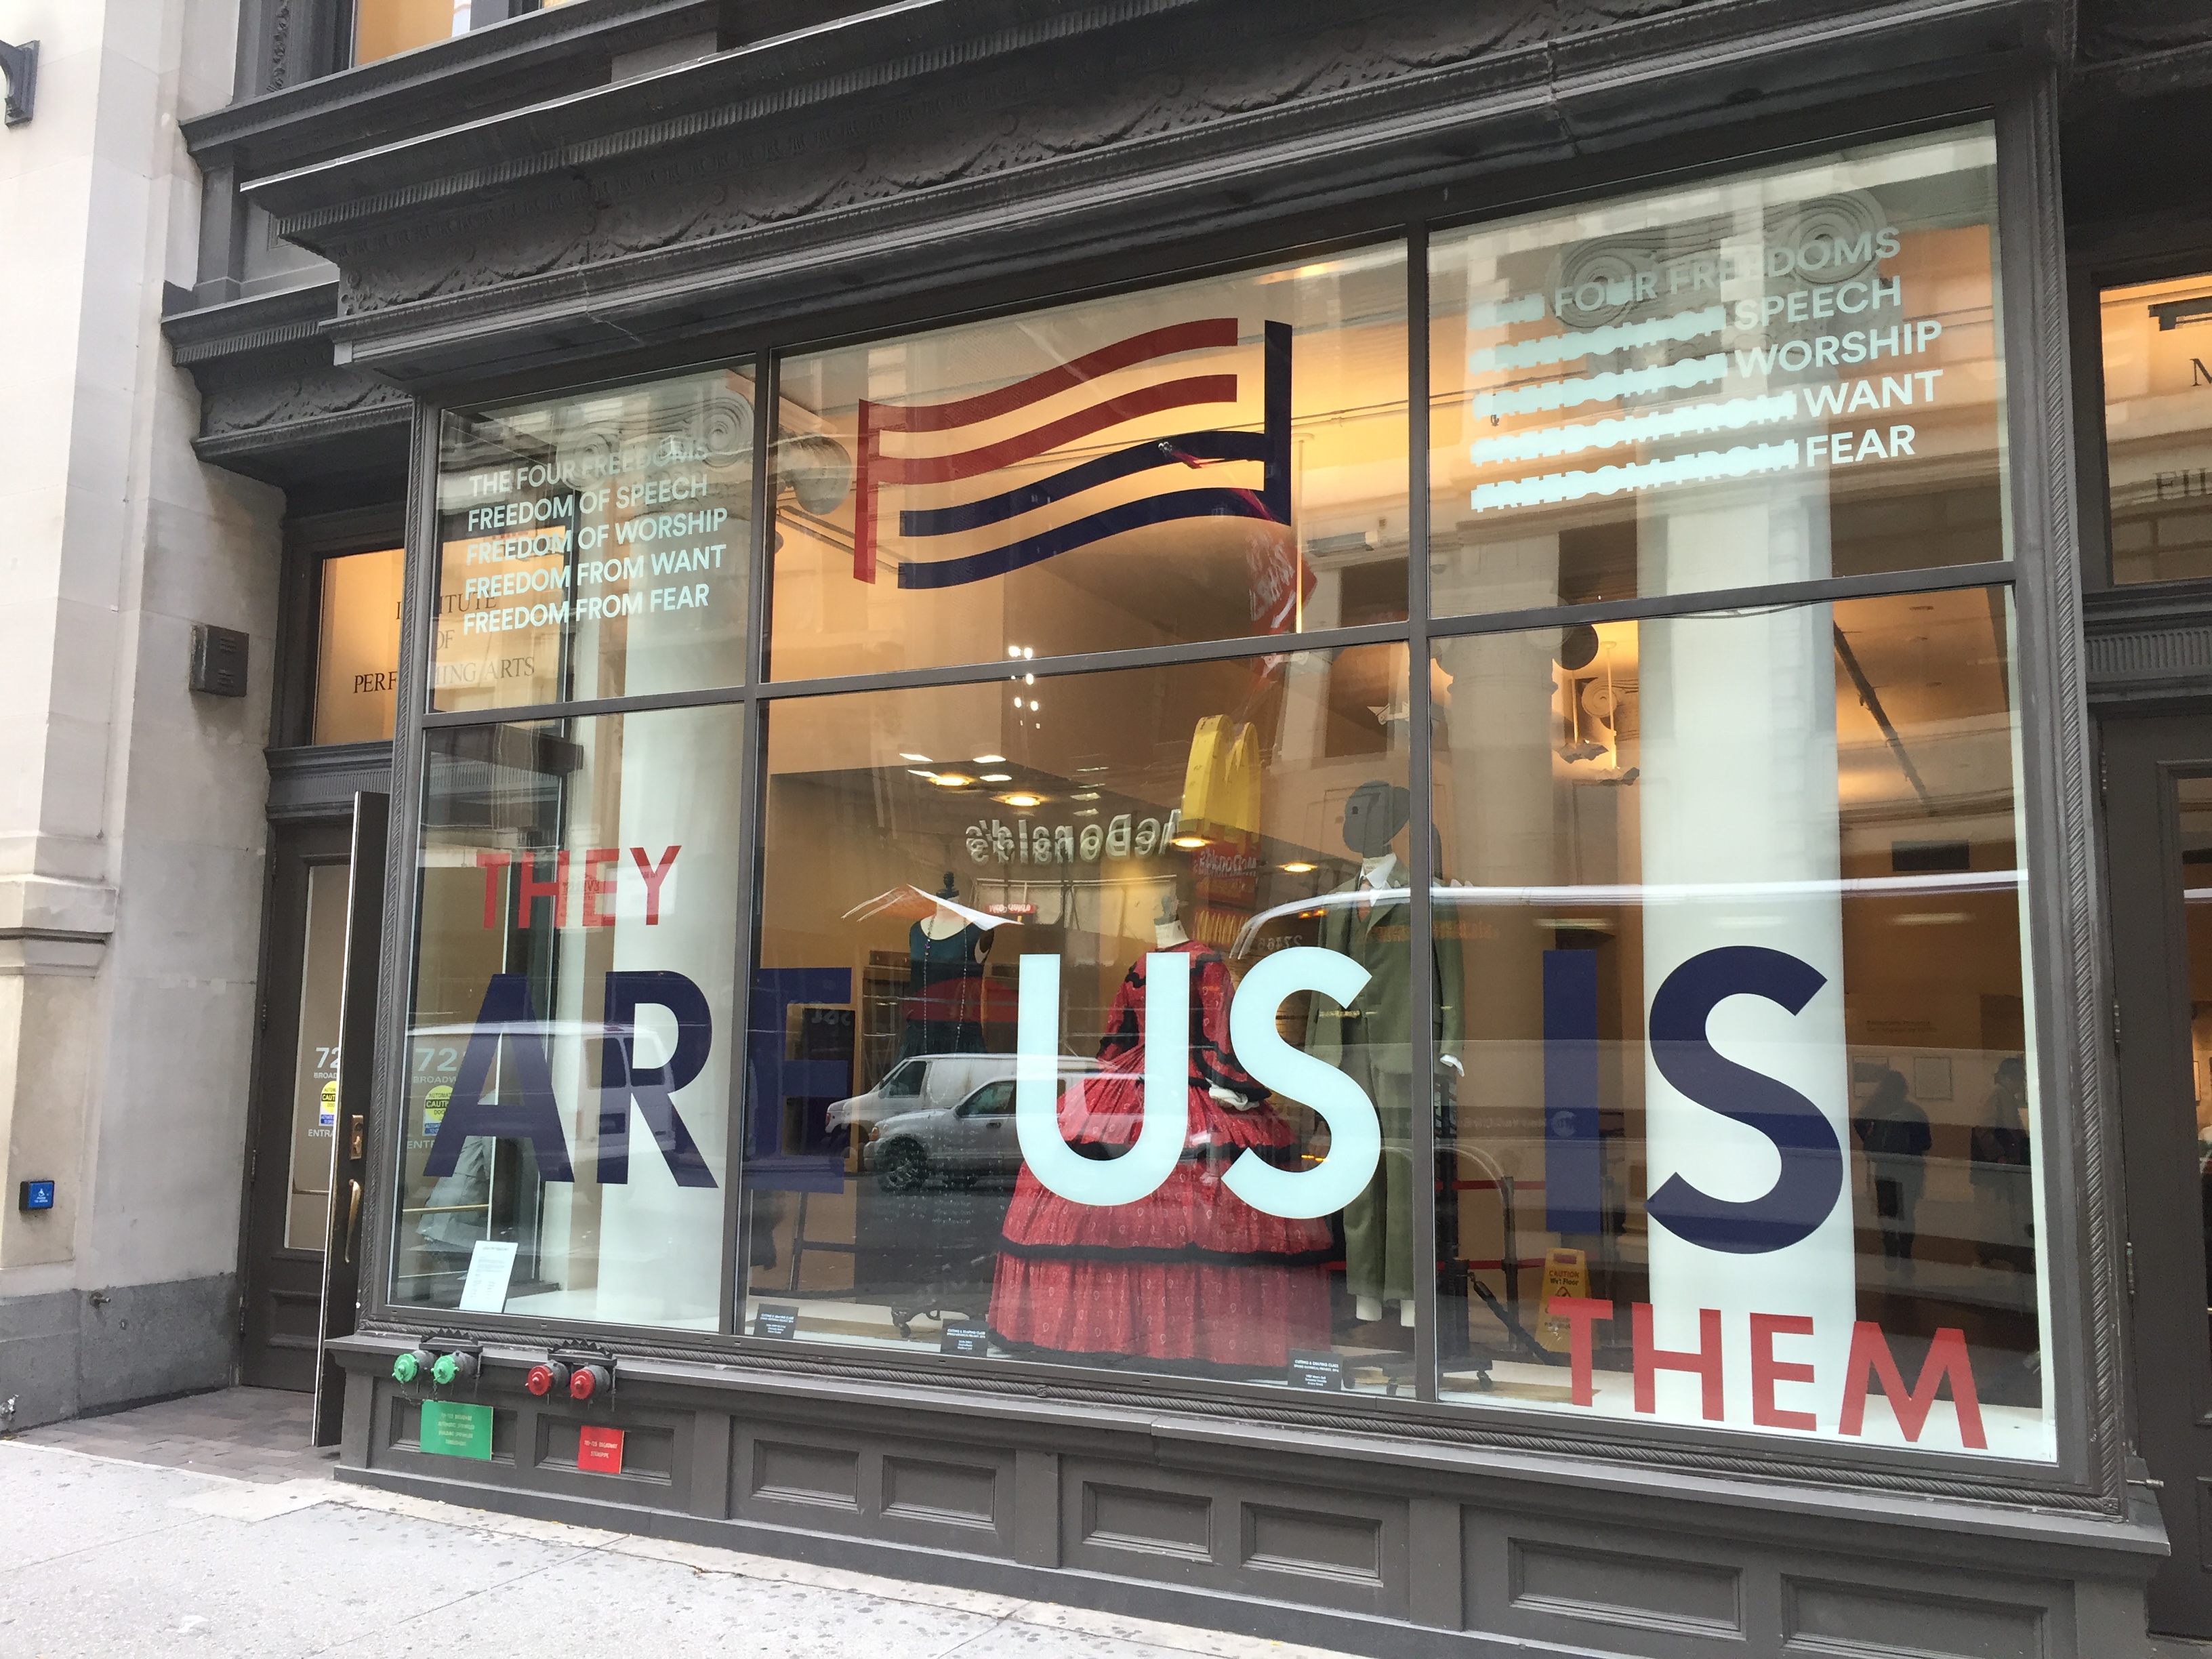 Street view of the 721 Broadway windows showing For Freedoms installation